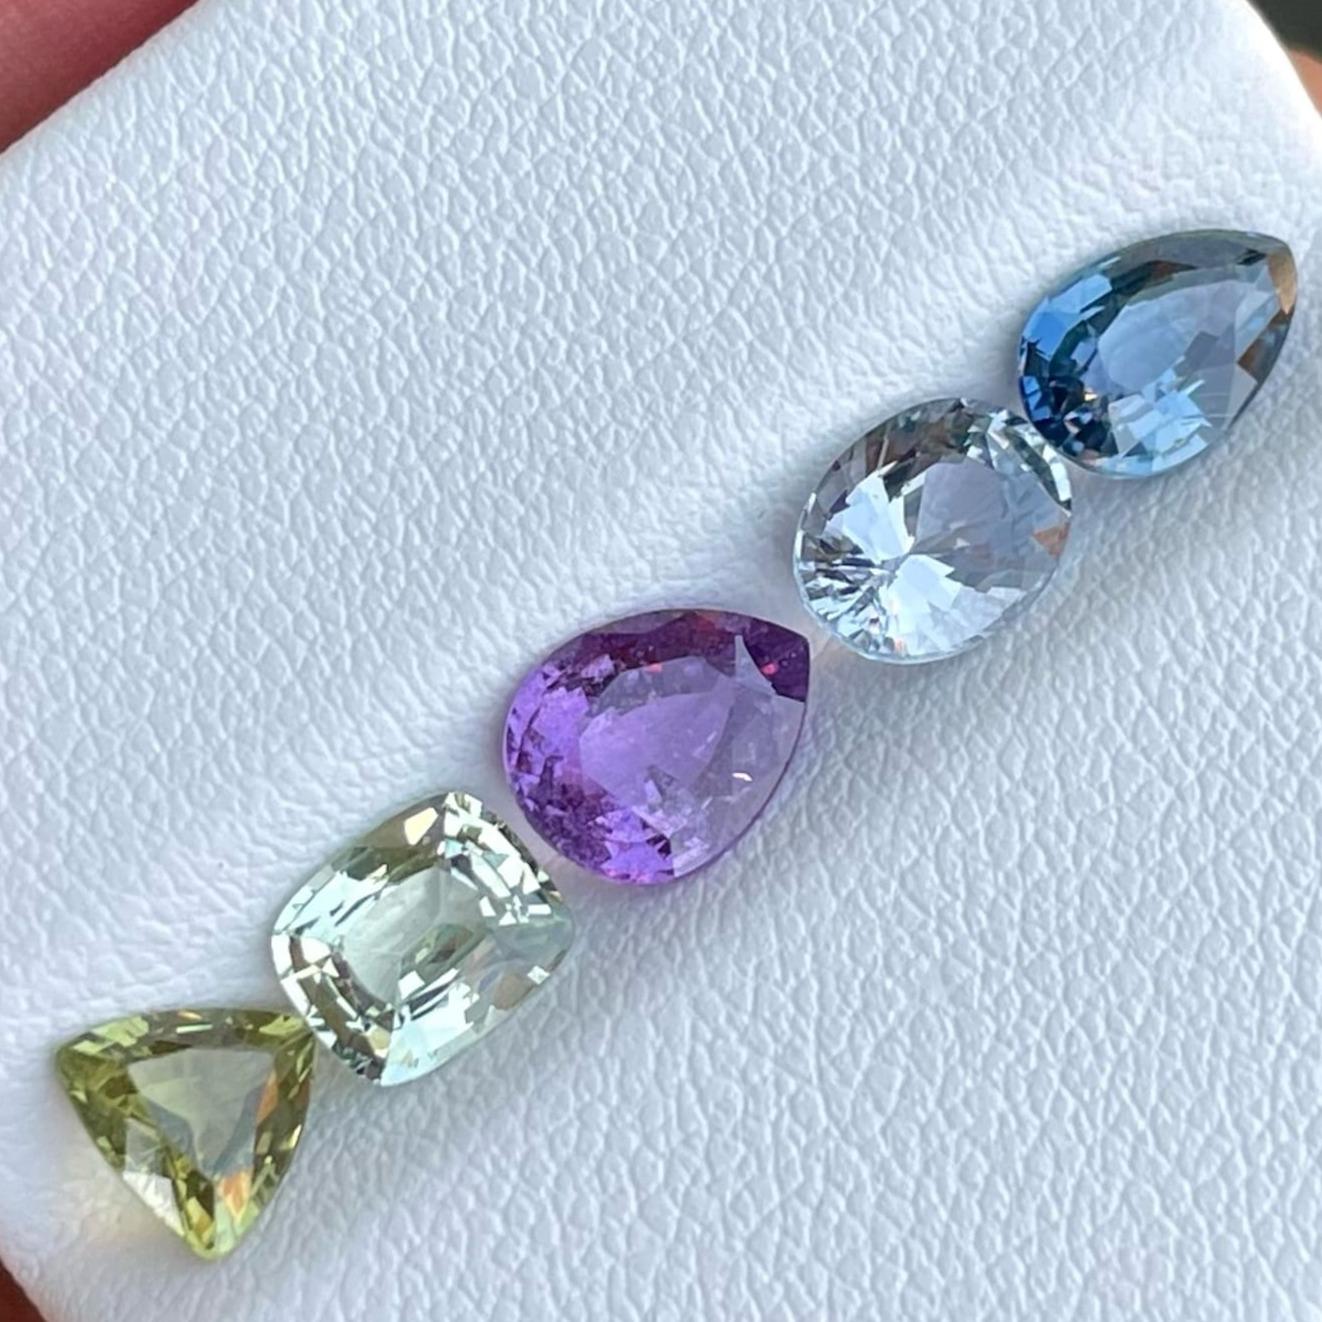 Gemstone Type Colorful Natural Sapphire Gemstone Lot
Weight 6.04 carats
Each weight 1.44, 1.27, 1.37, 1.15 and 0.80 carats
Clarity VVS
Origin Sri Lanka
Treatment Heated




Introducing the breathtaking 6.04 carats Colorful Stones Loose Sapphire Lot,